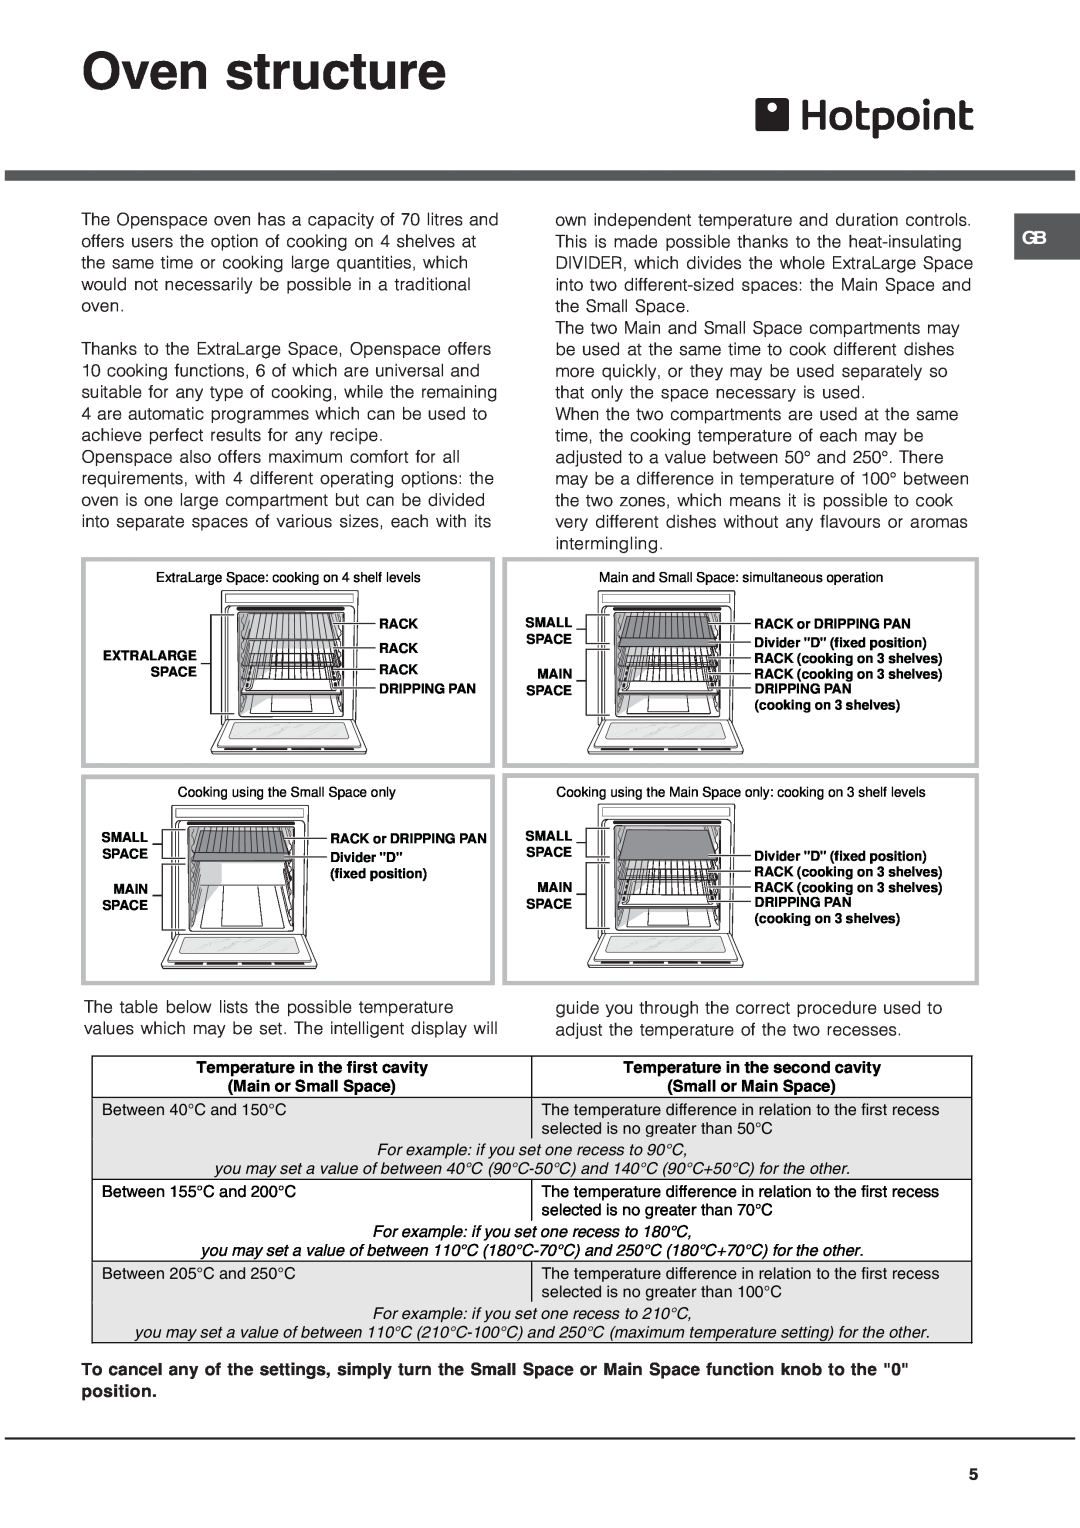 Hotpoint OS 897D C IX, OS 897D HP, OS 897D IX, OS 897D C HP manual Oven structure 